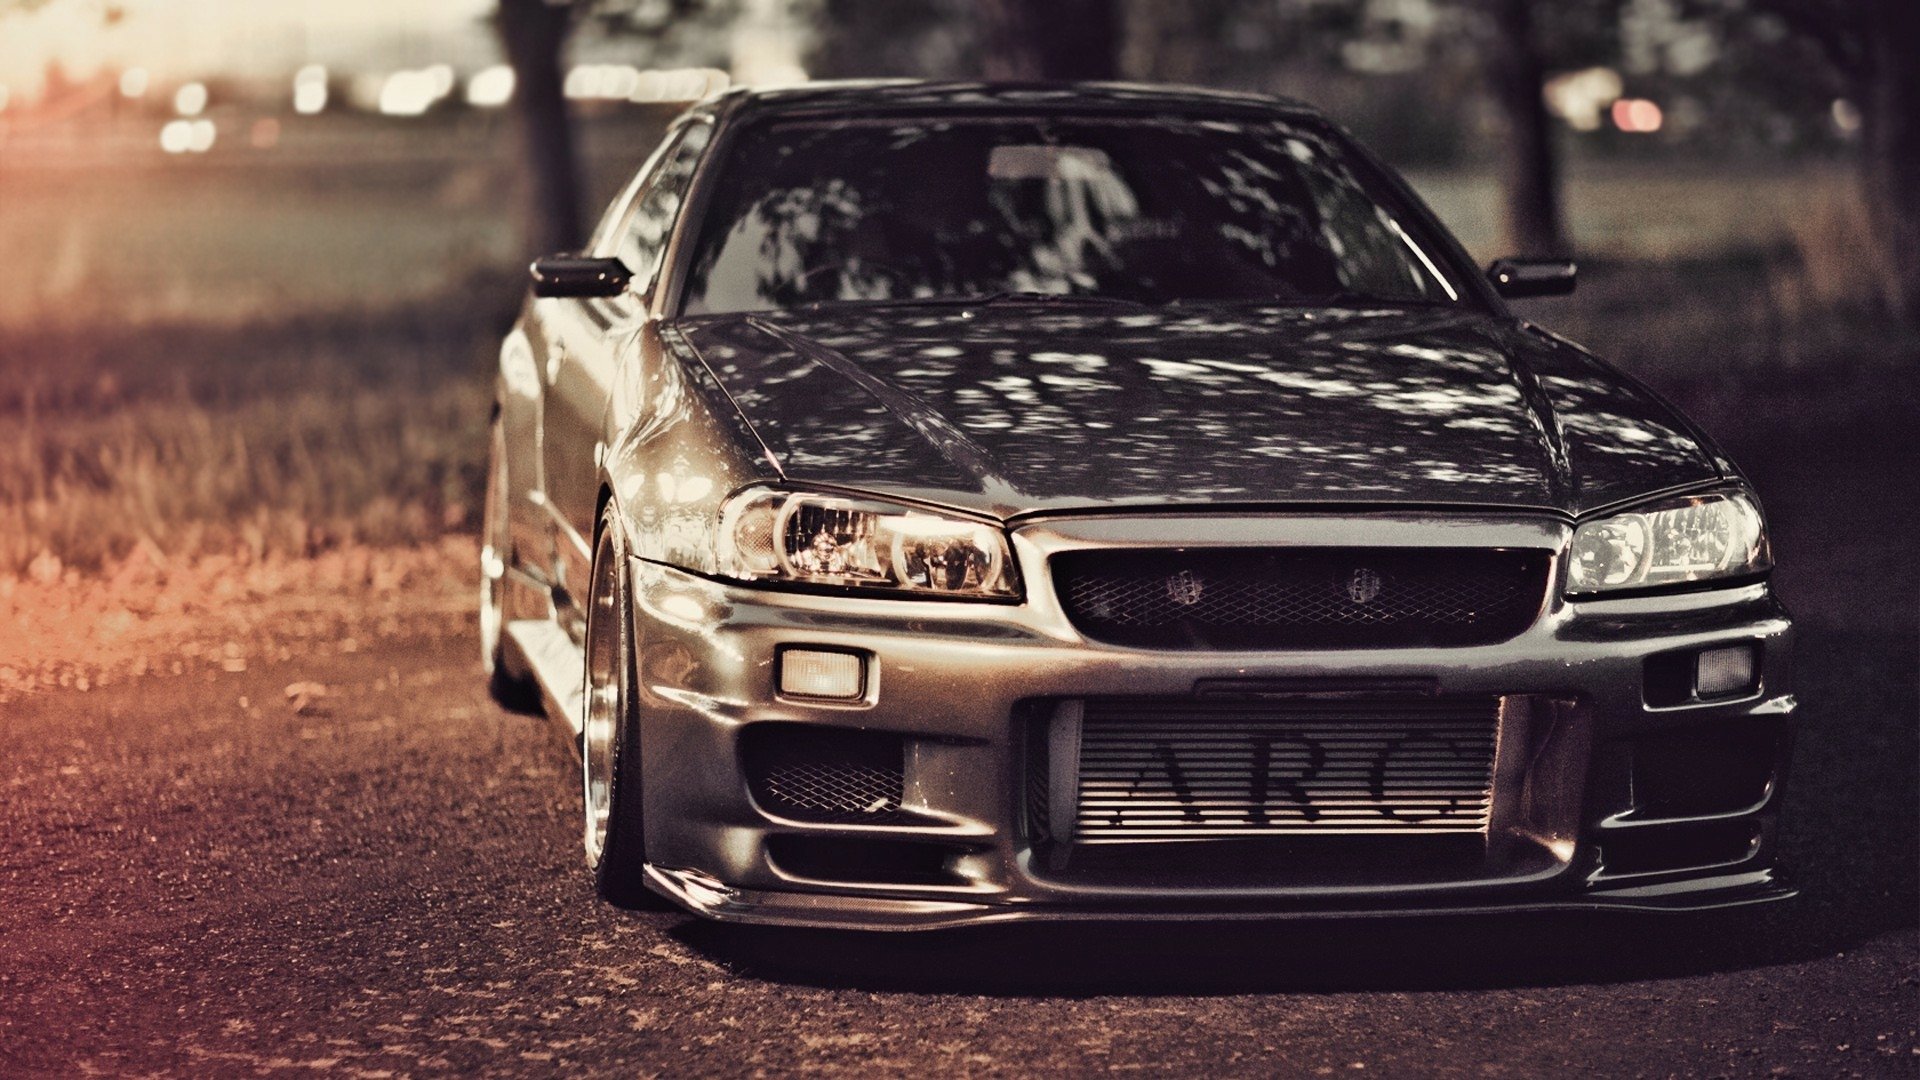 41 Jdm Hd Wallpapers Background Images Wallpaper Abyss